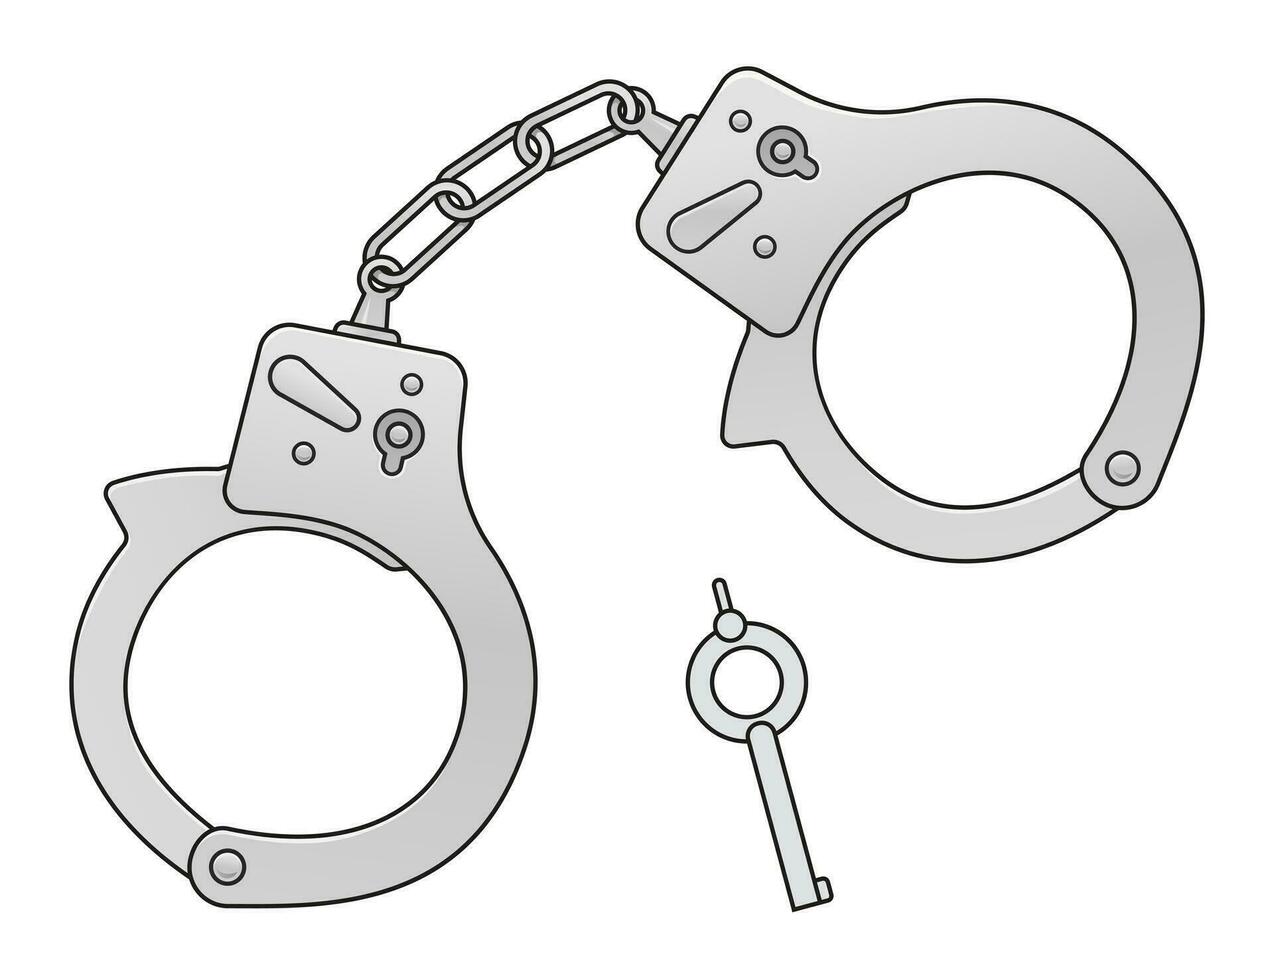 Police handcuffs with key. Isolated vector illustration.